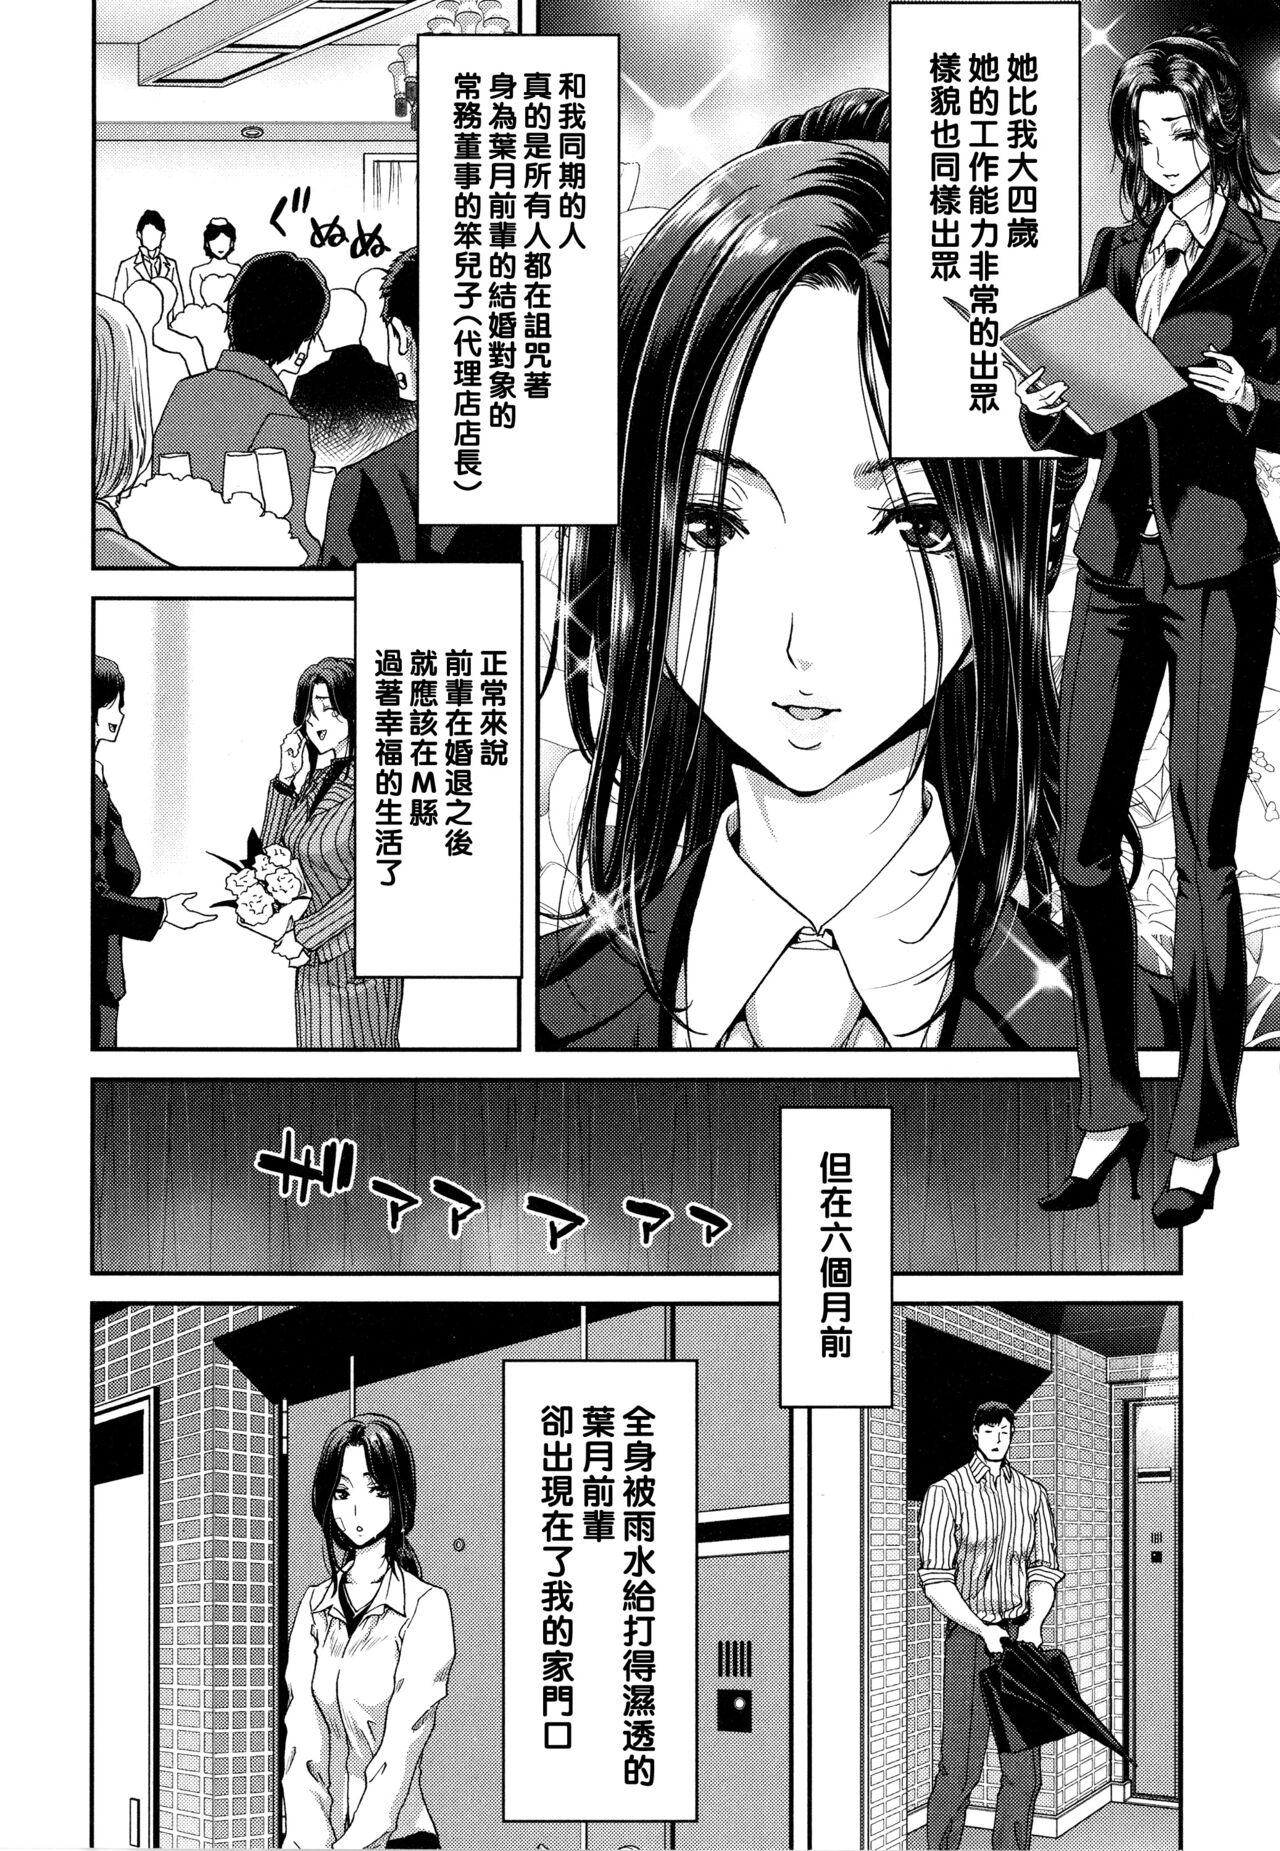 Spanish Iede Onna o Hirottara - When I picked up a runaway girl. Petera - Page 8